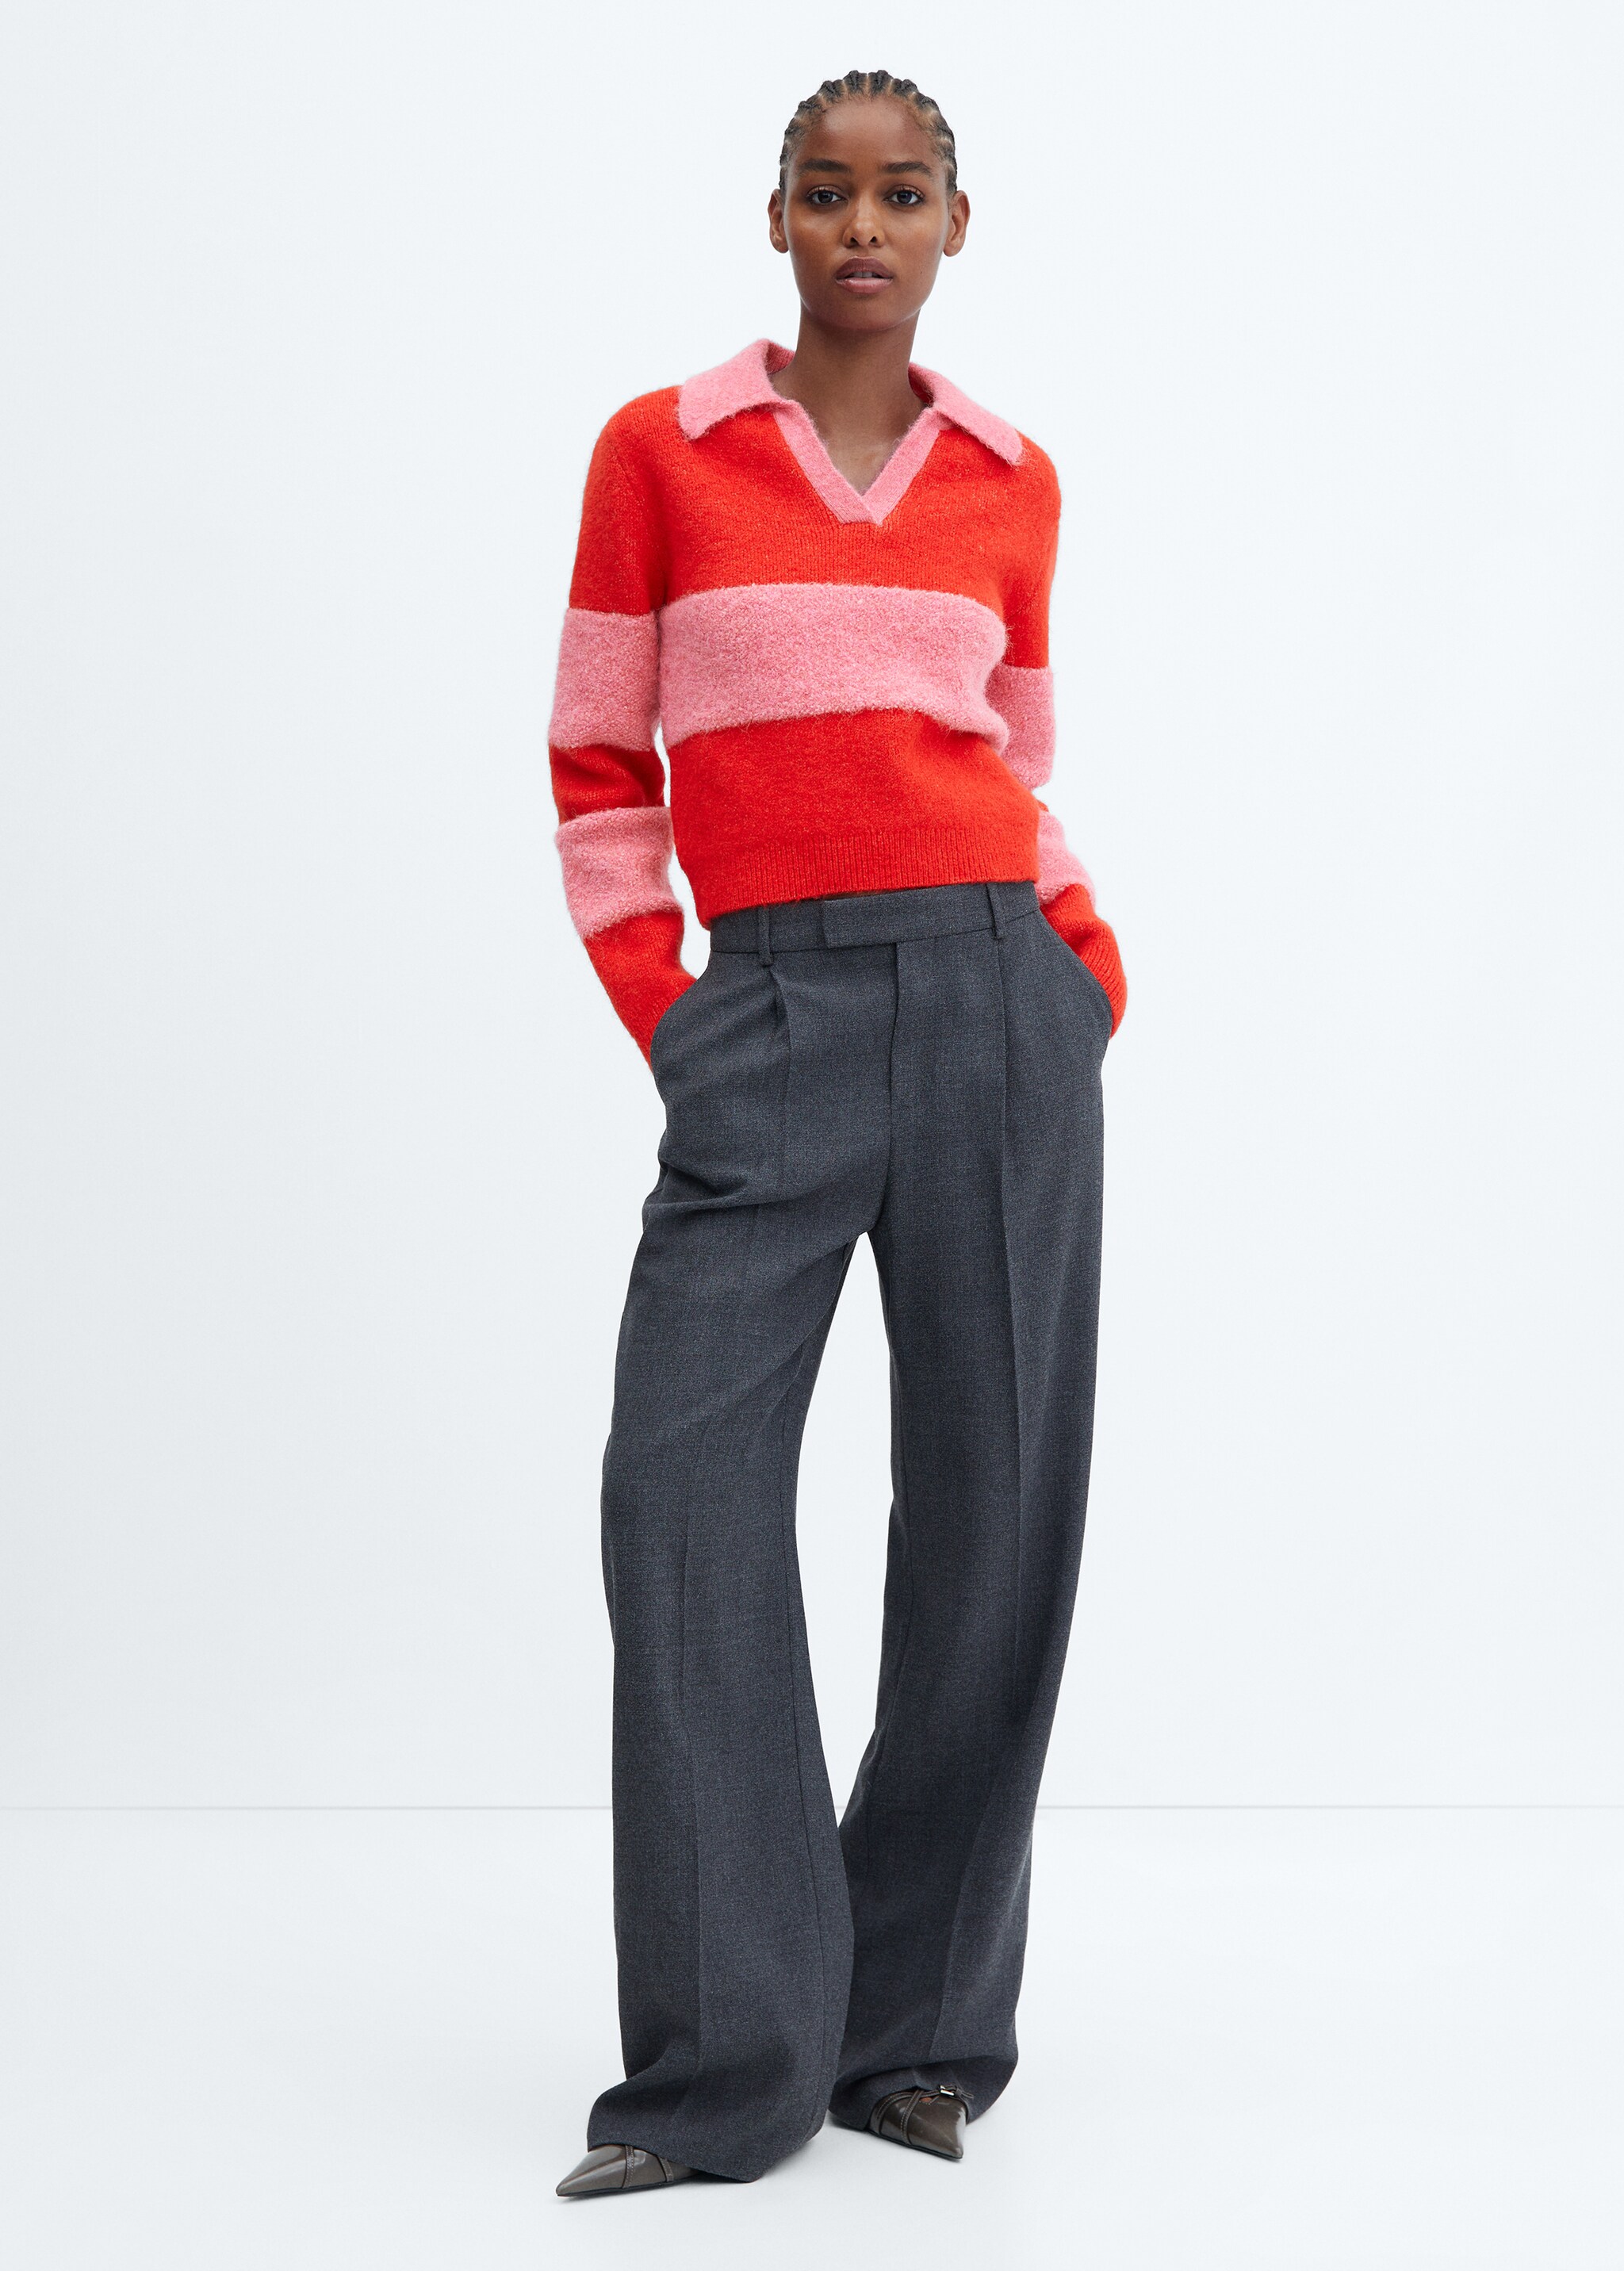 Polo-neck sweater with contrast panel - General plane